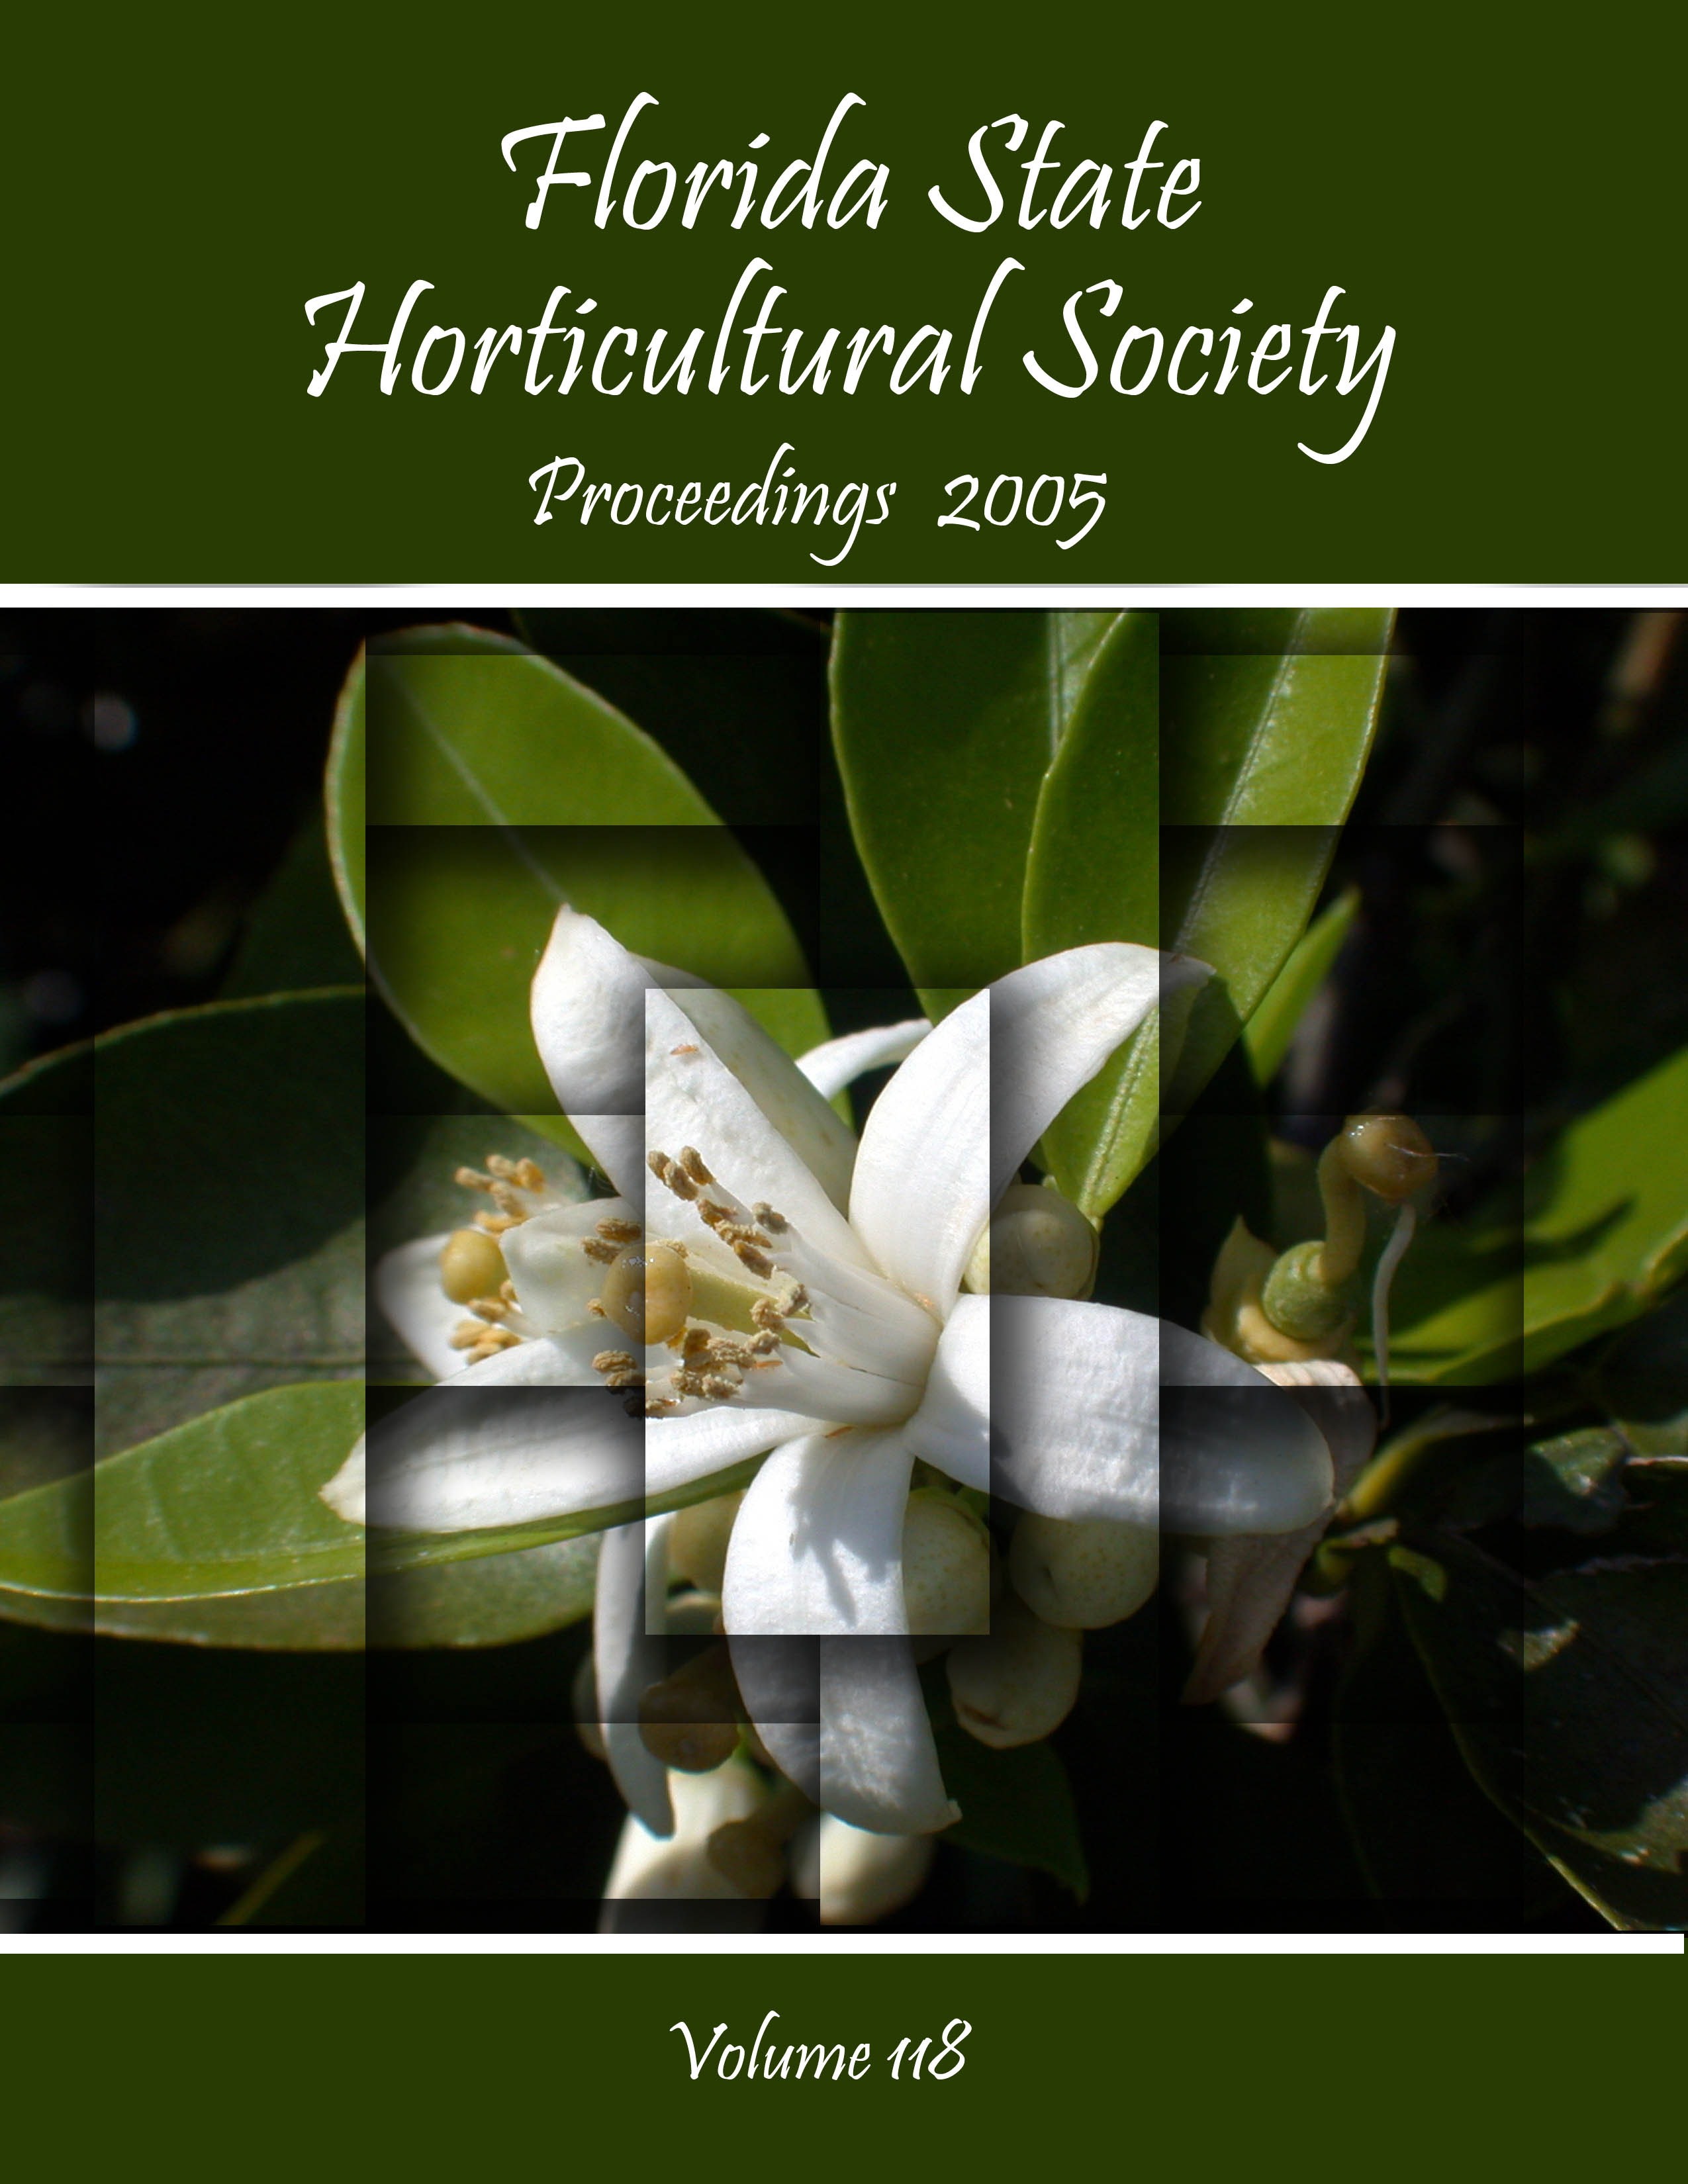 2005 Proceedings of the Florida State Horticultural Society